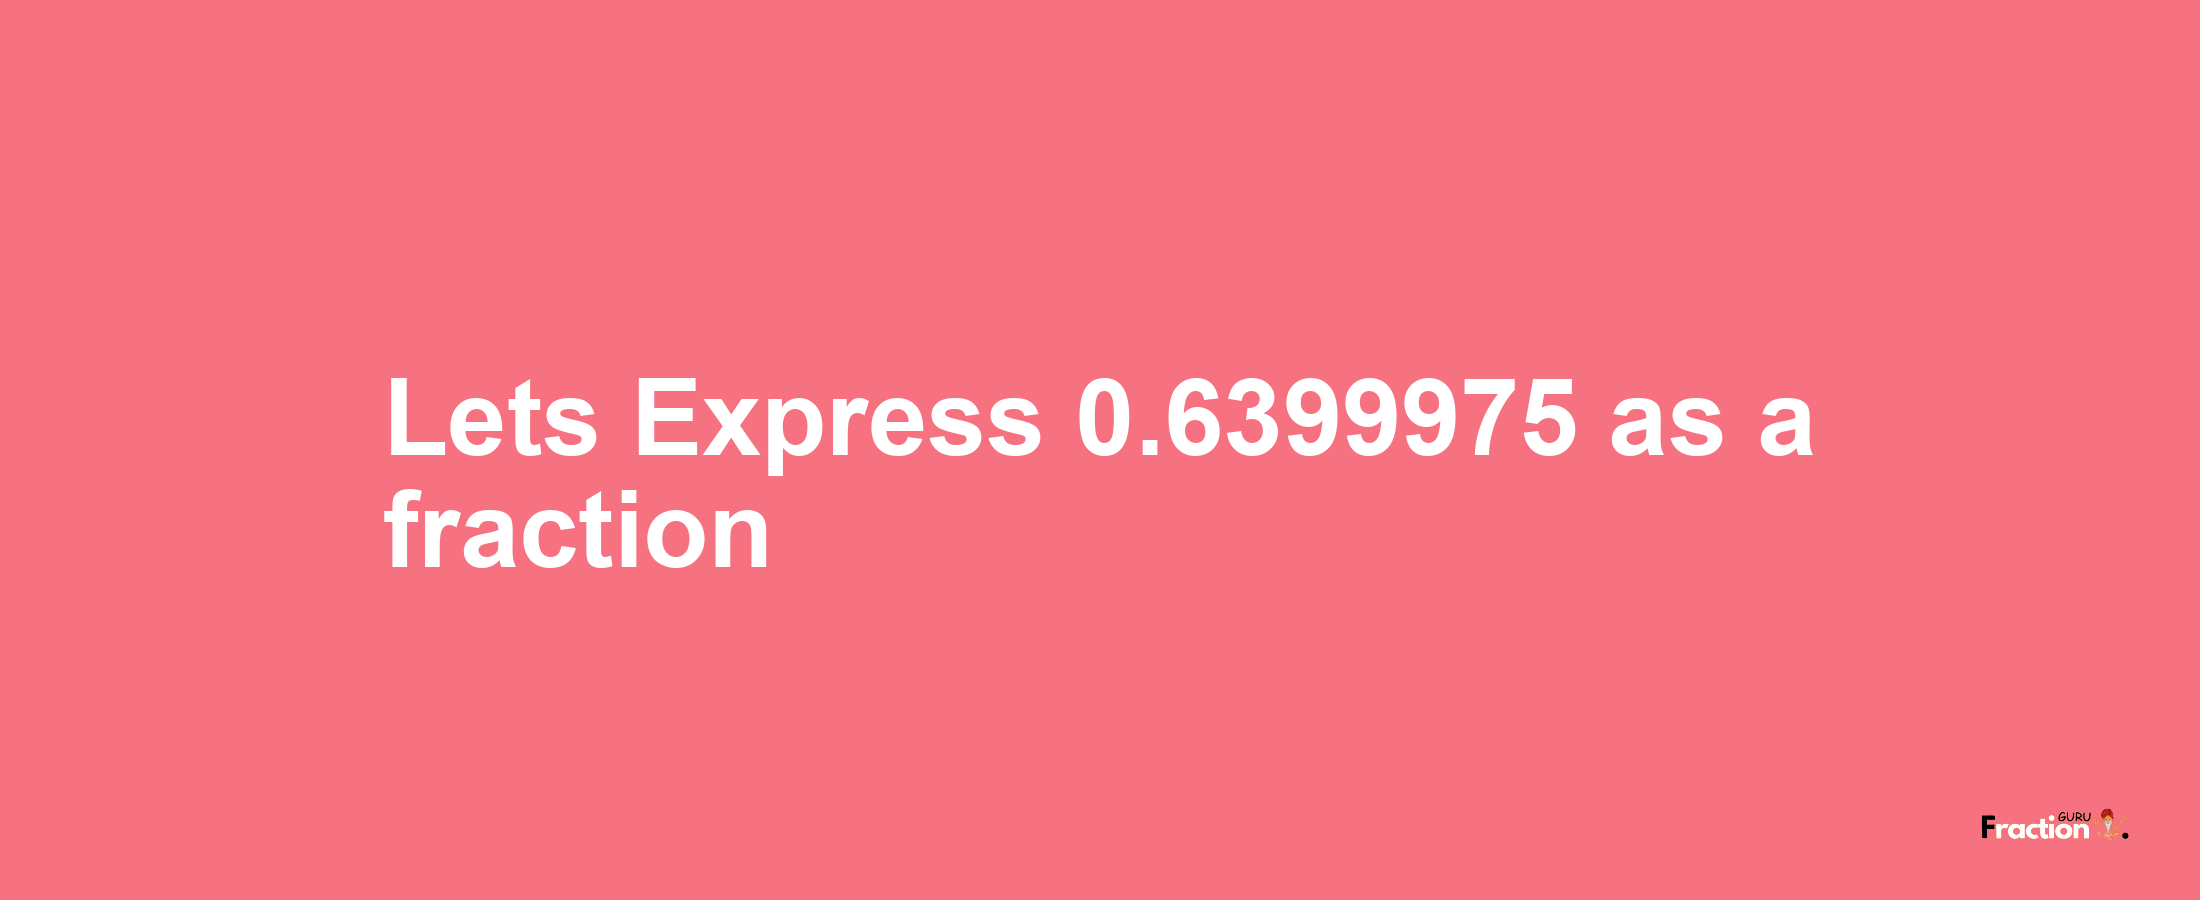 Lets Express 0.6399975 as afraction